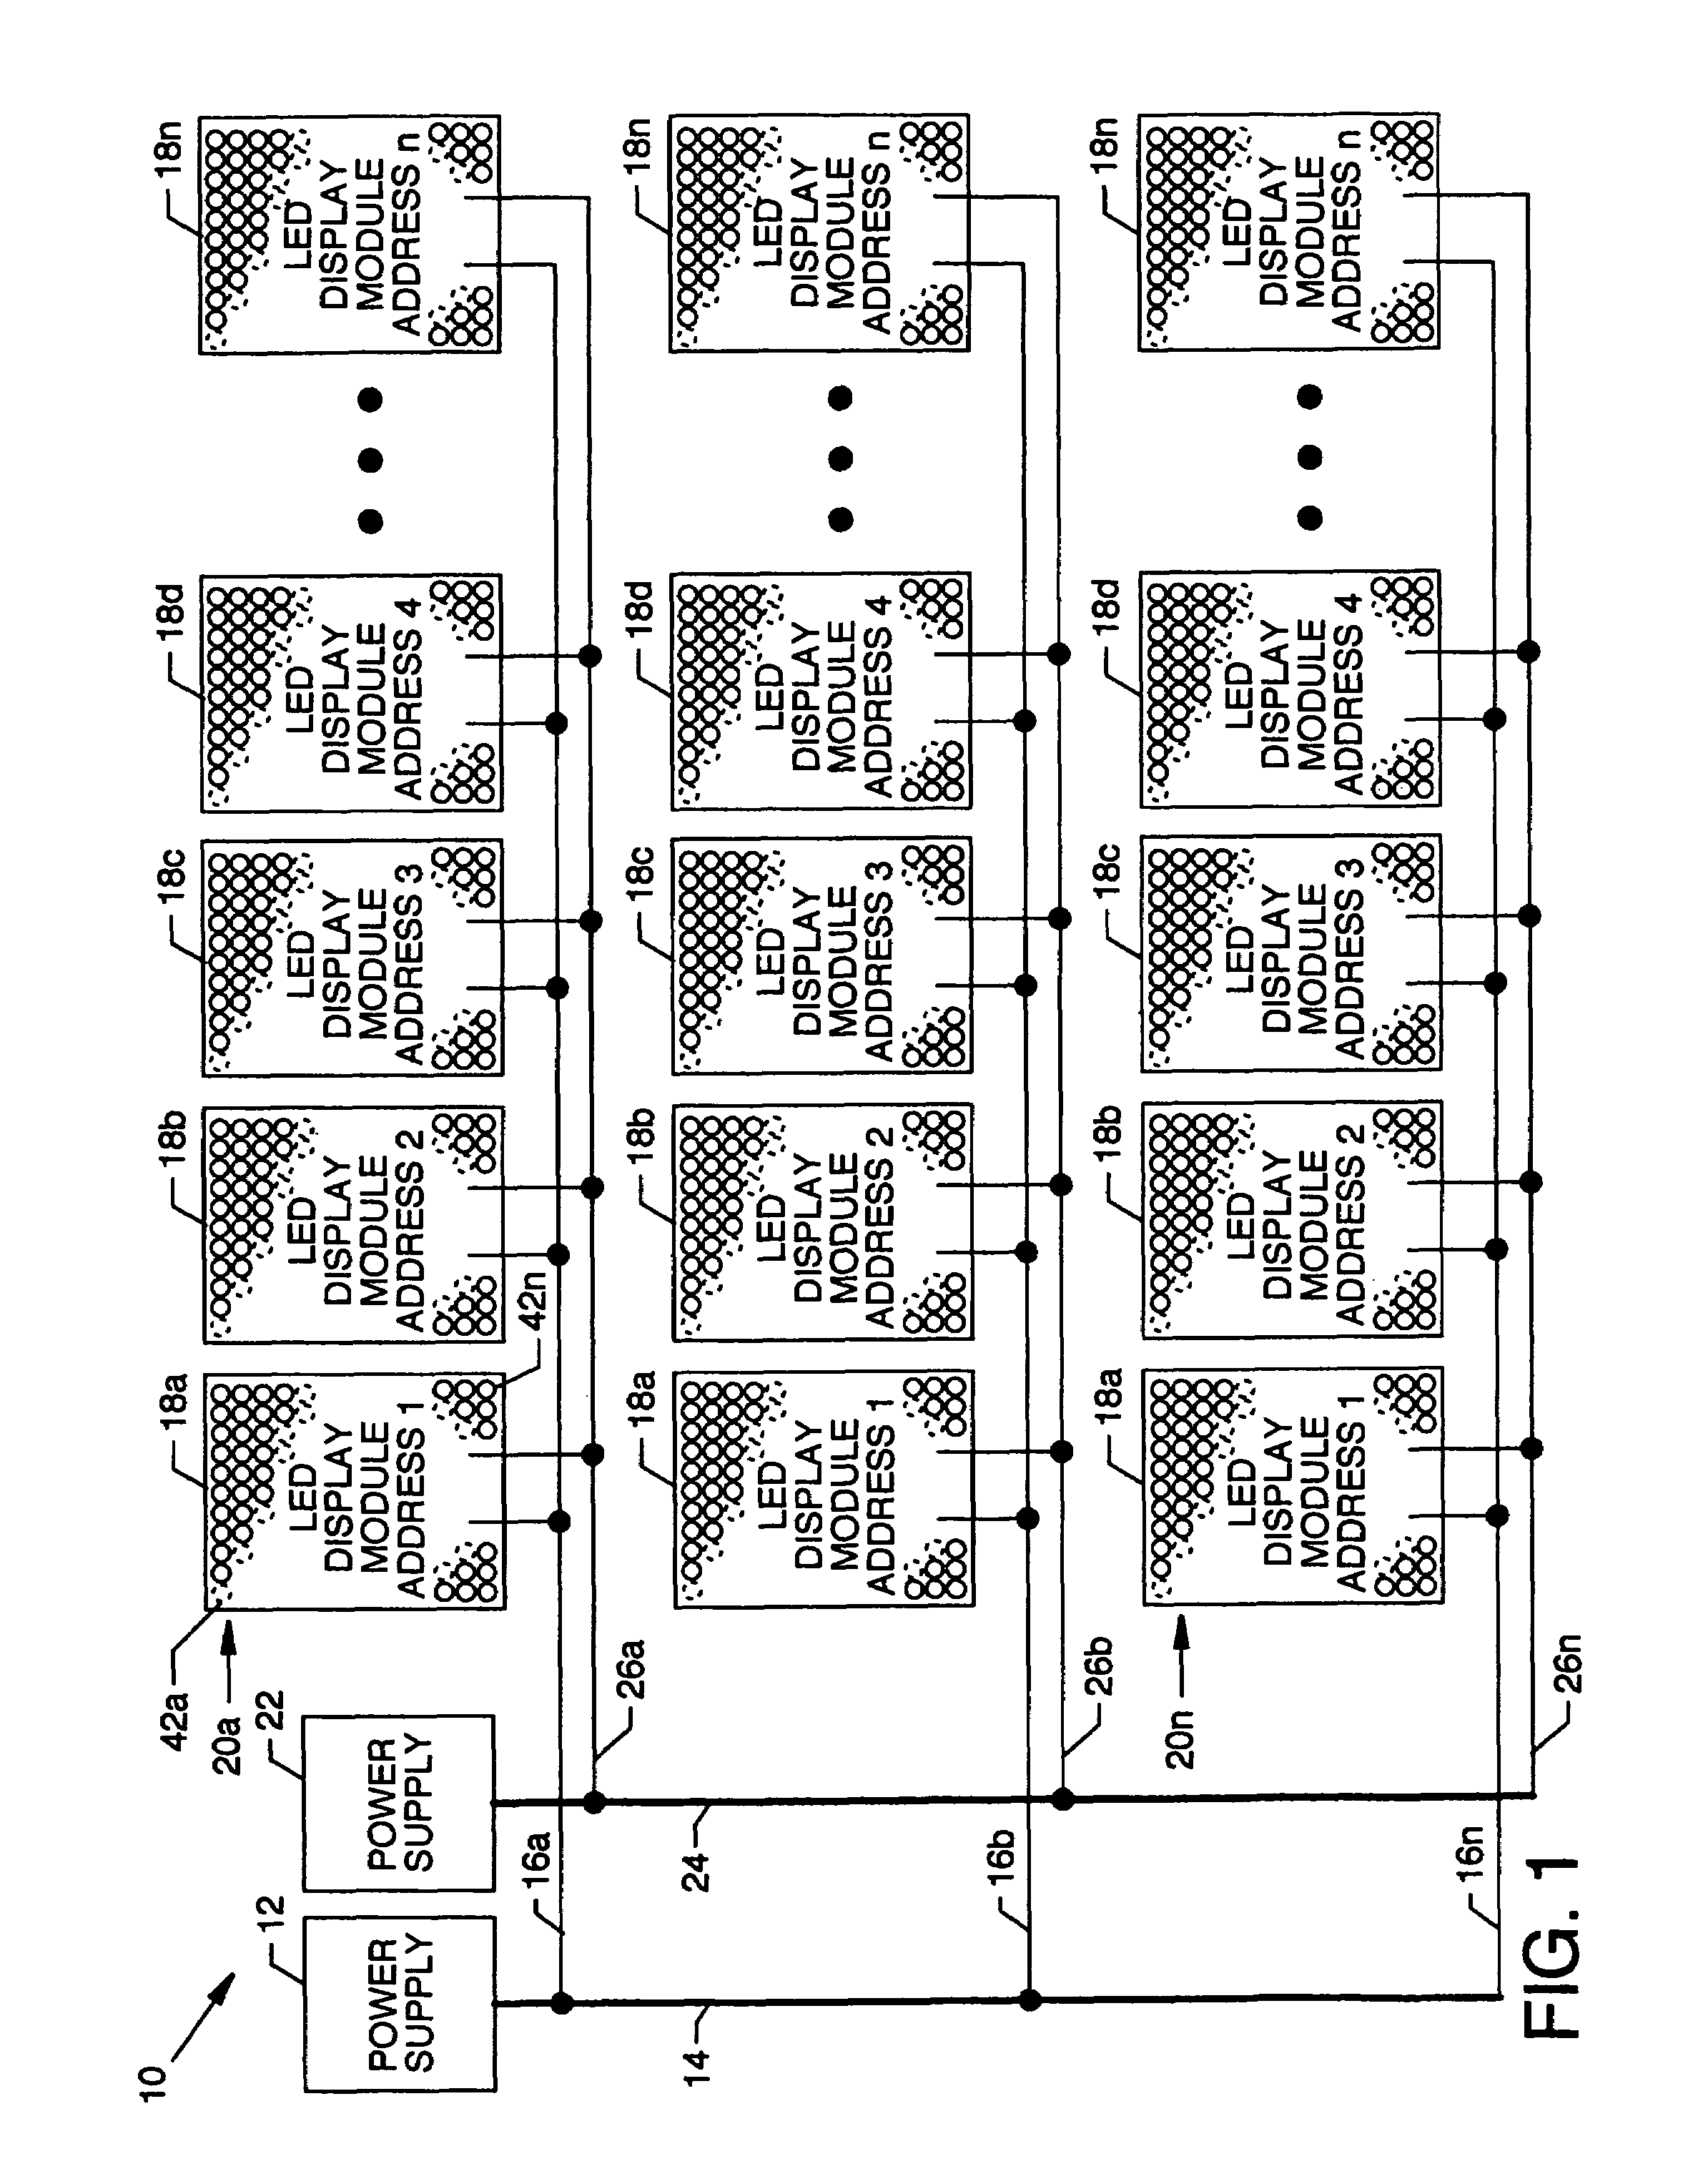 Dual power supply switching system operating in parallel for providing power to a plurality of LED display modules